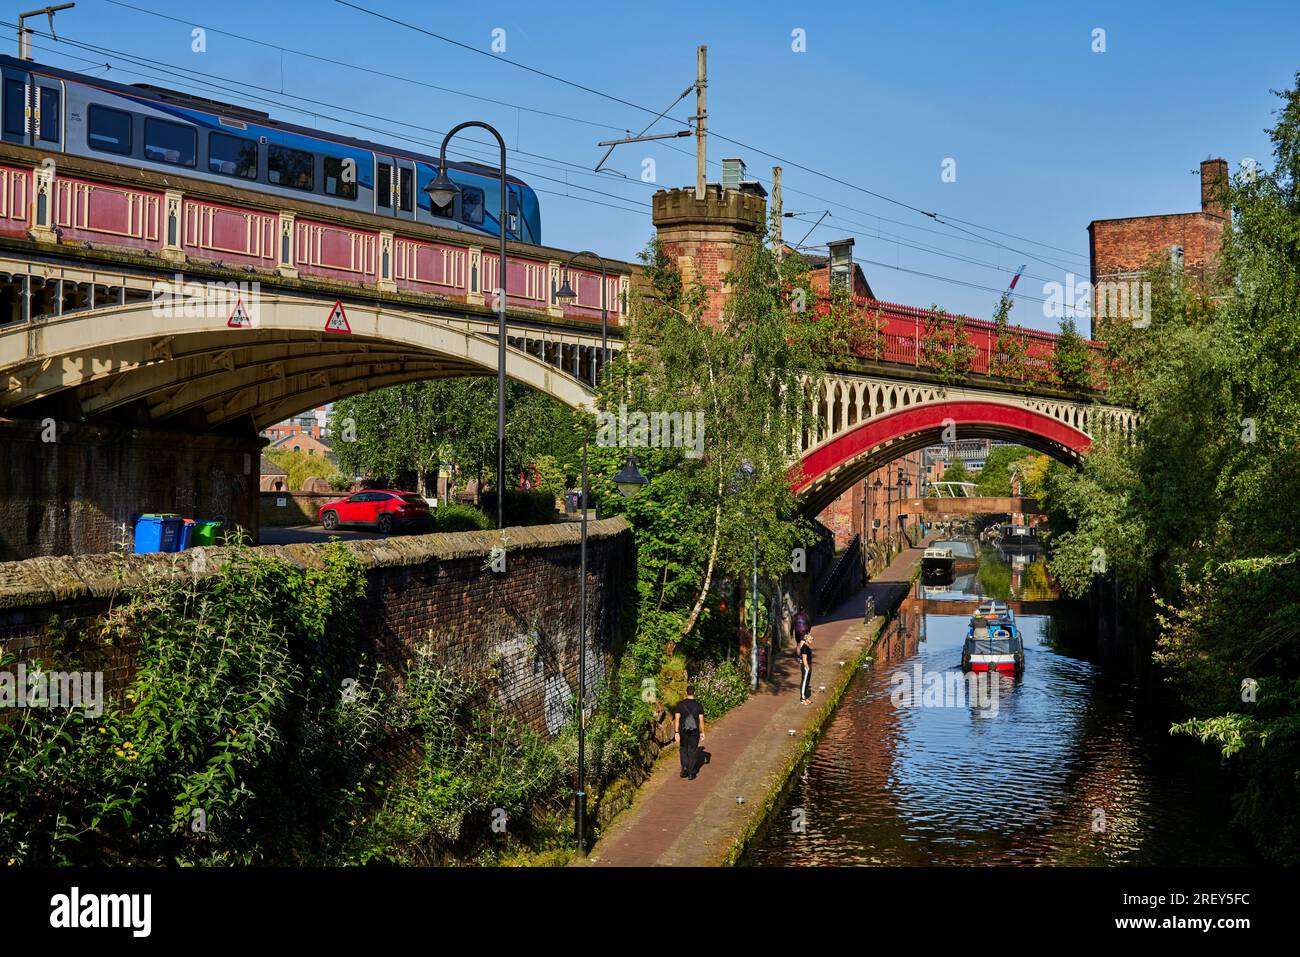 Manchester city centre and the Rochdale Canal in the Deansgate Locks area near Castlefield Stock Photo